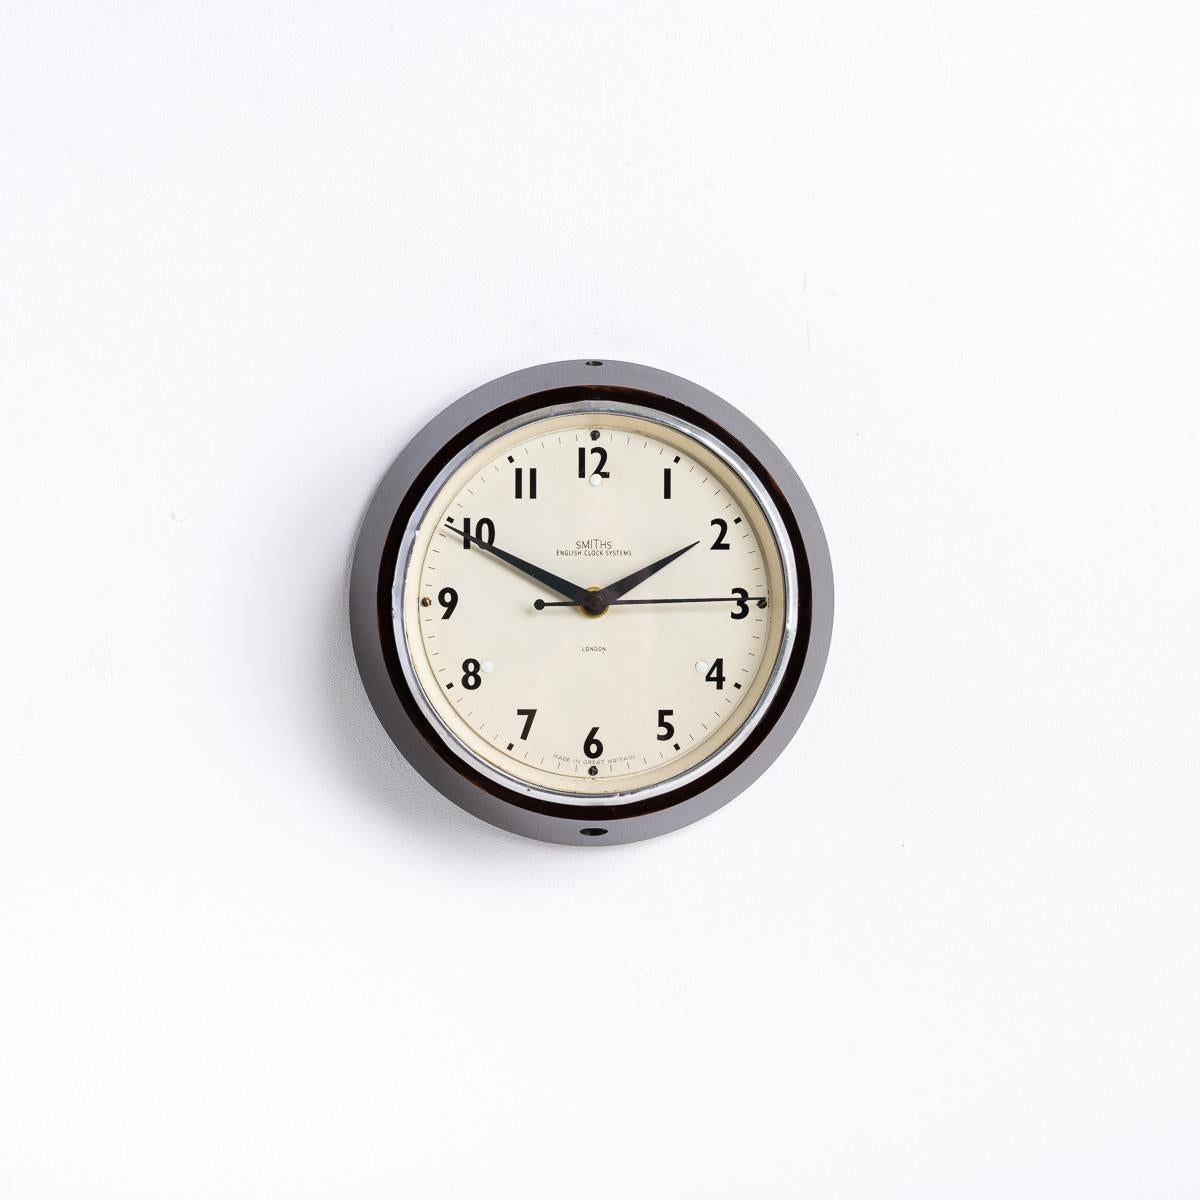 SMALL VINTAGE FACTORY WALL CLOCK BY SMITHS

A stunning find from a Brick Factory in Wales, upon conversion to living accommodation a bricked up store was discovered where 12 clocks were found. Of those 12, nine were identical Smiths English Clock